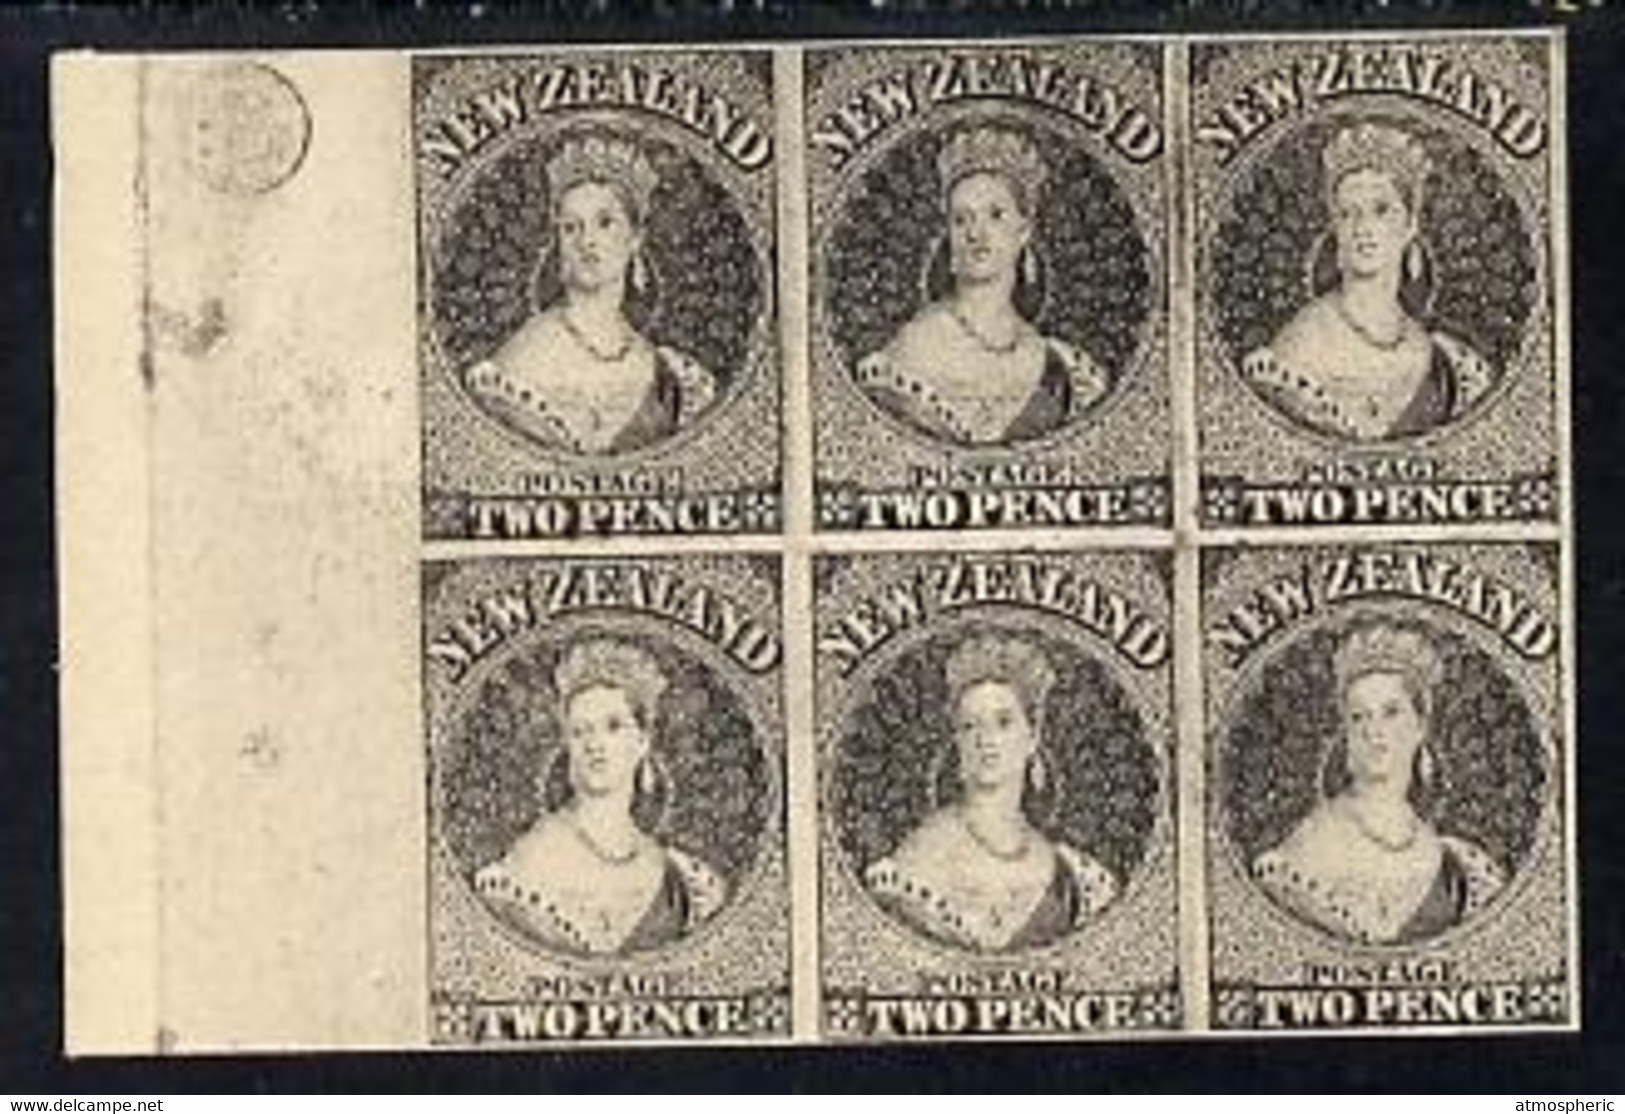 New Zealand 1855 Chalon Head 2d Hausberg's Imperf Proof Block Of 6 In Black On White Card, Very Fine - Unused Stamps